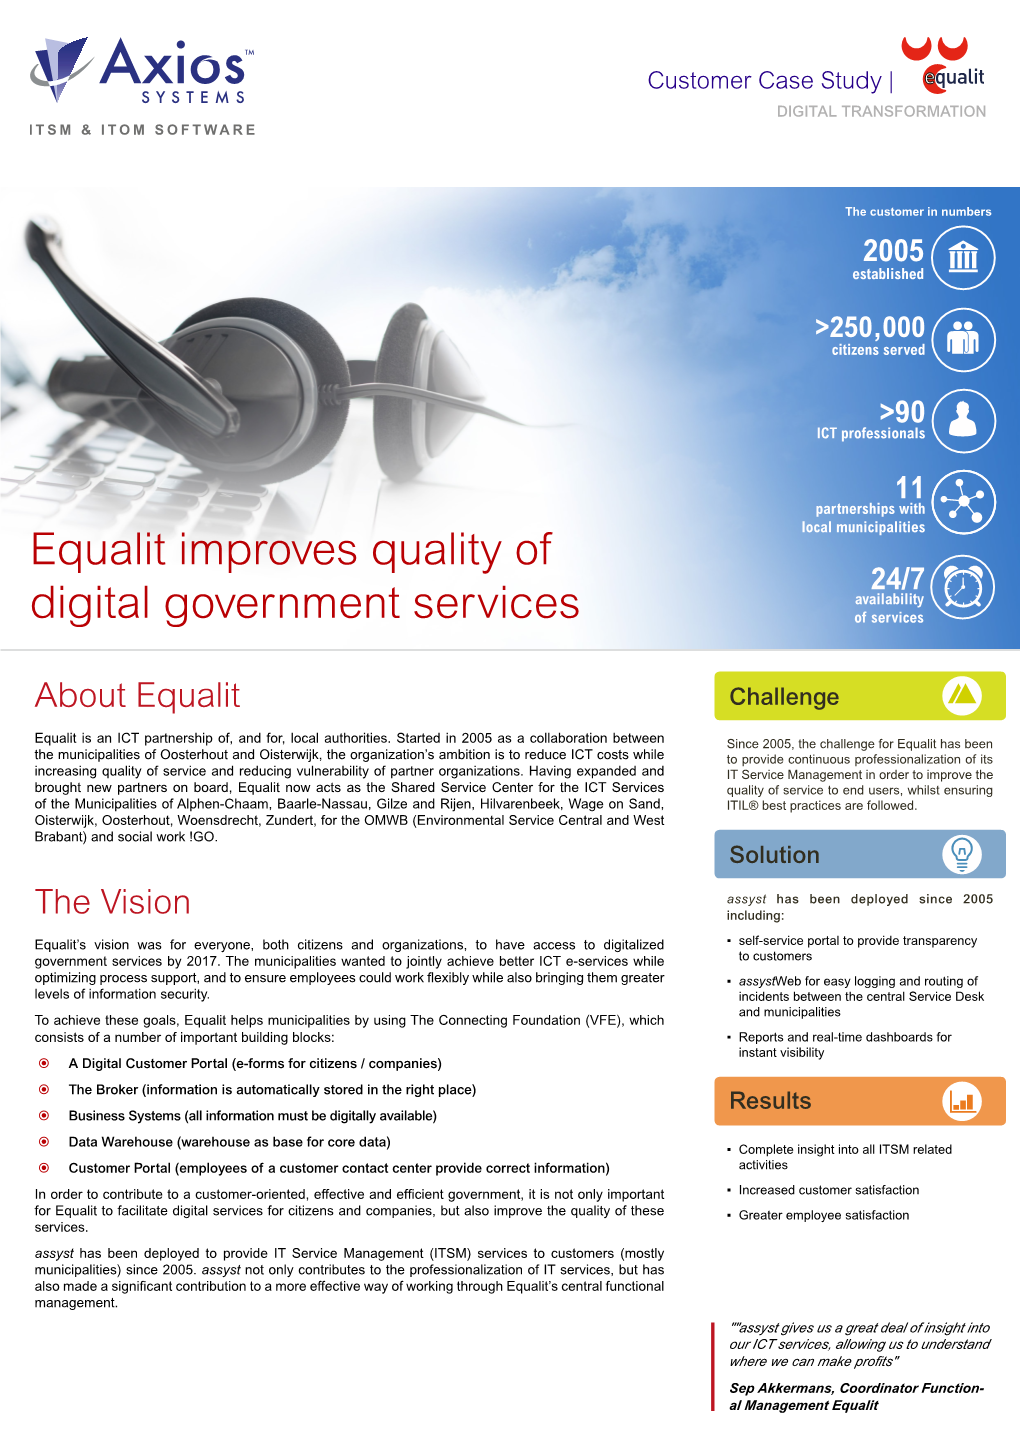 Equalit Improves Quality of Digital Government Services